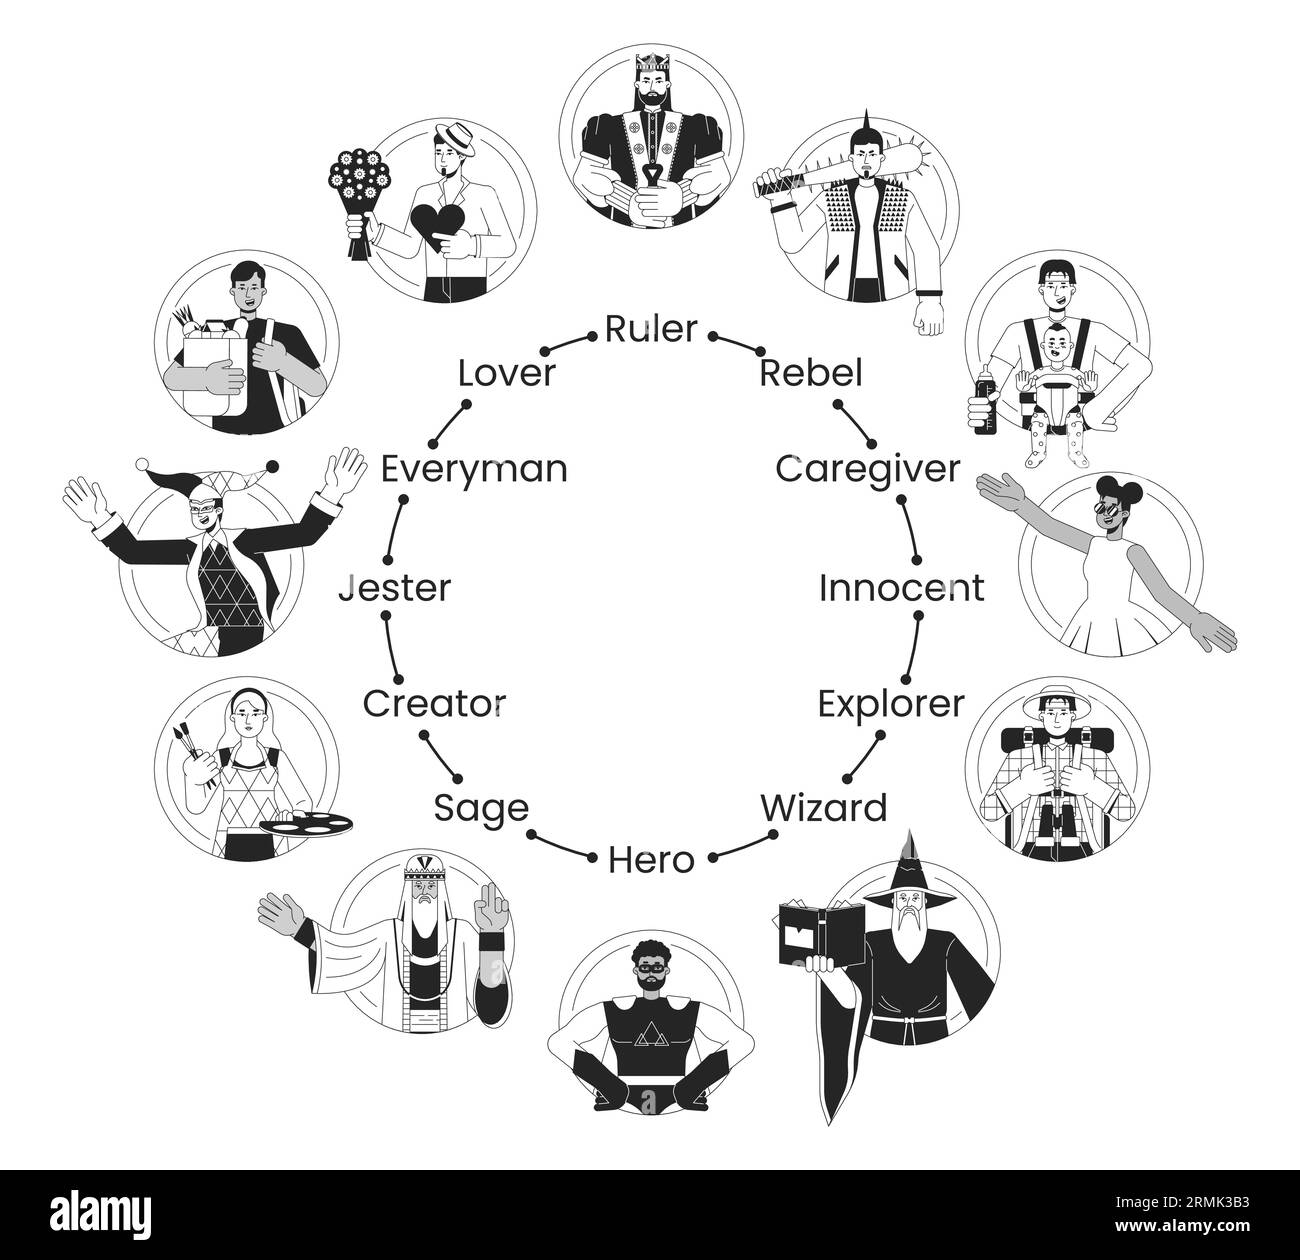 Personality archetypes bw concept vector spot illustrations Stock Vector